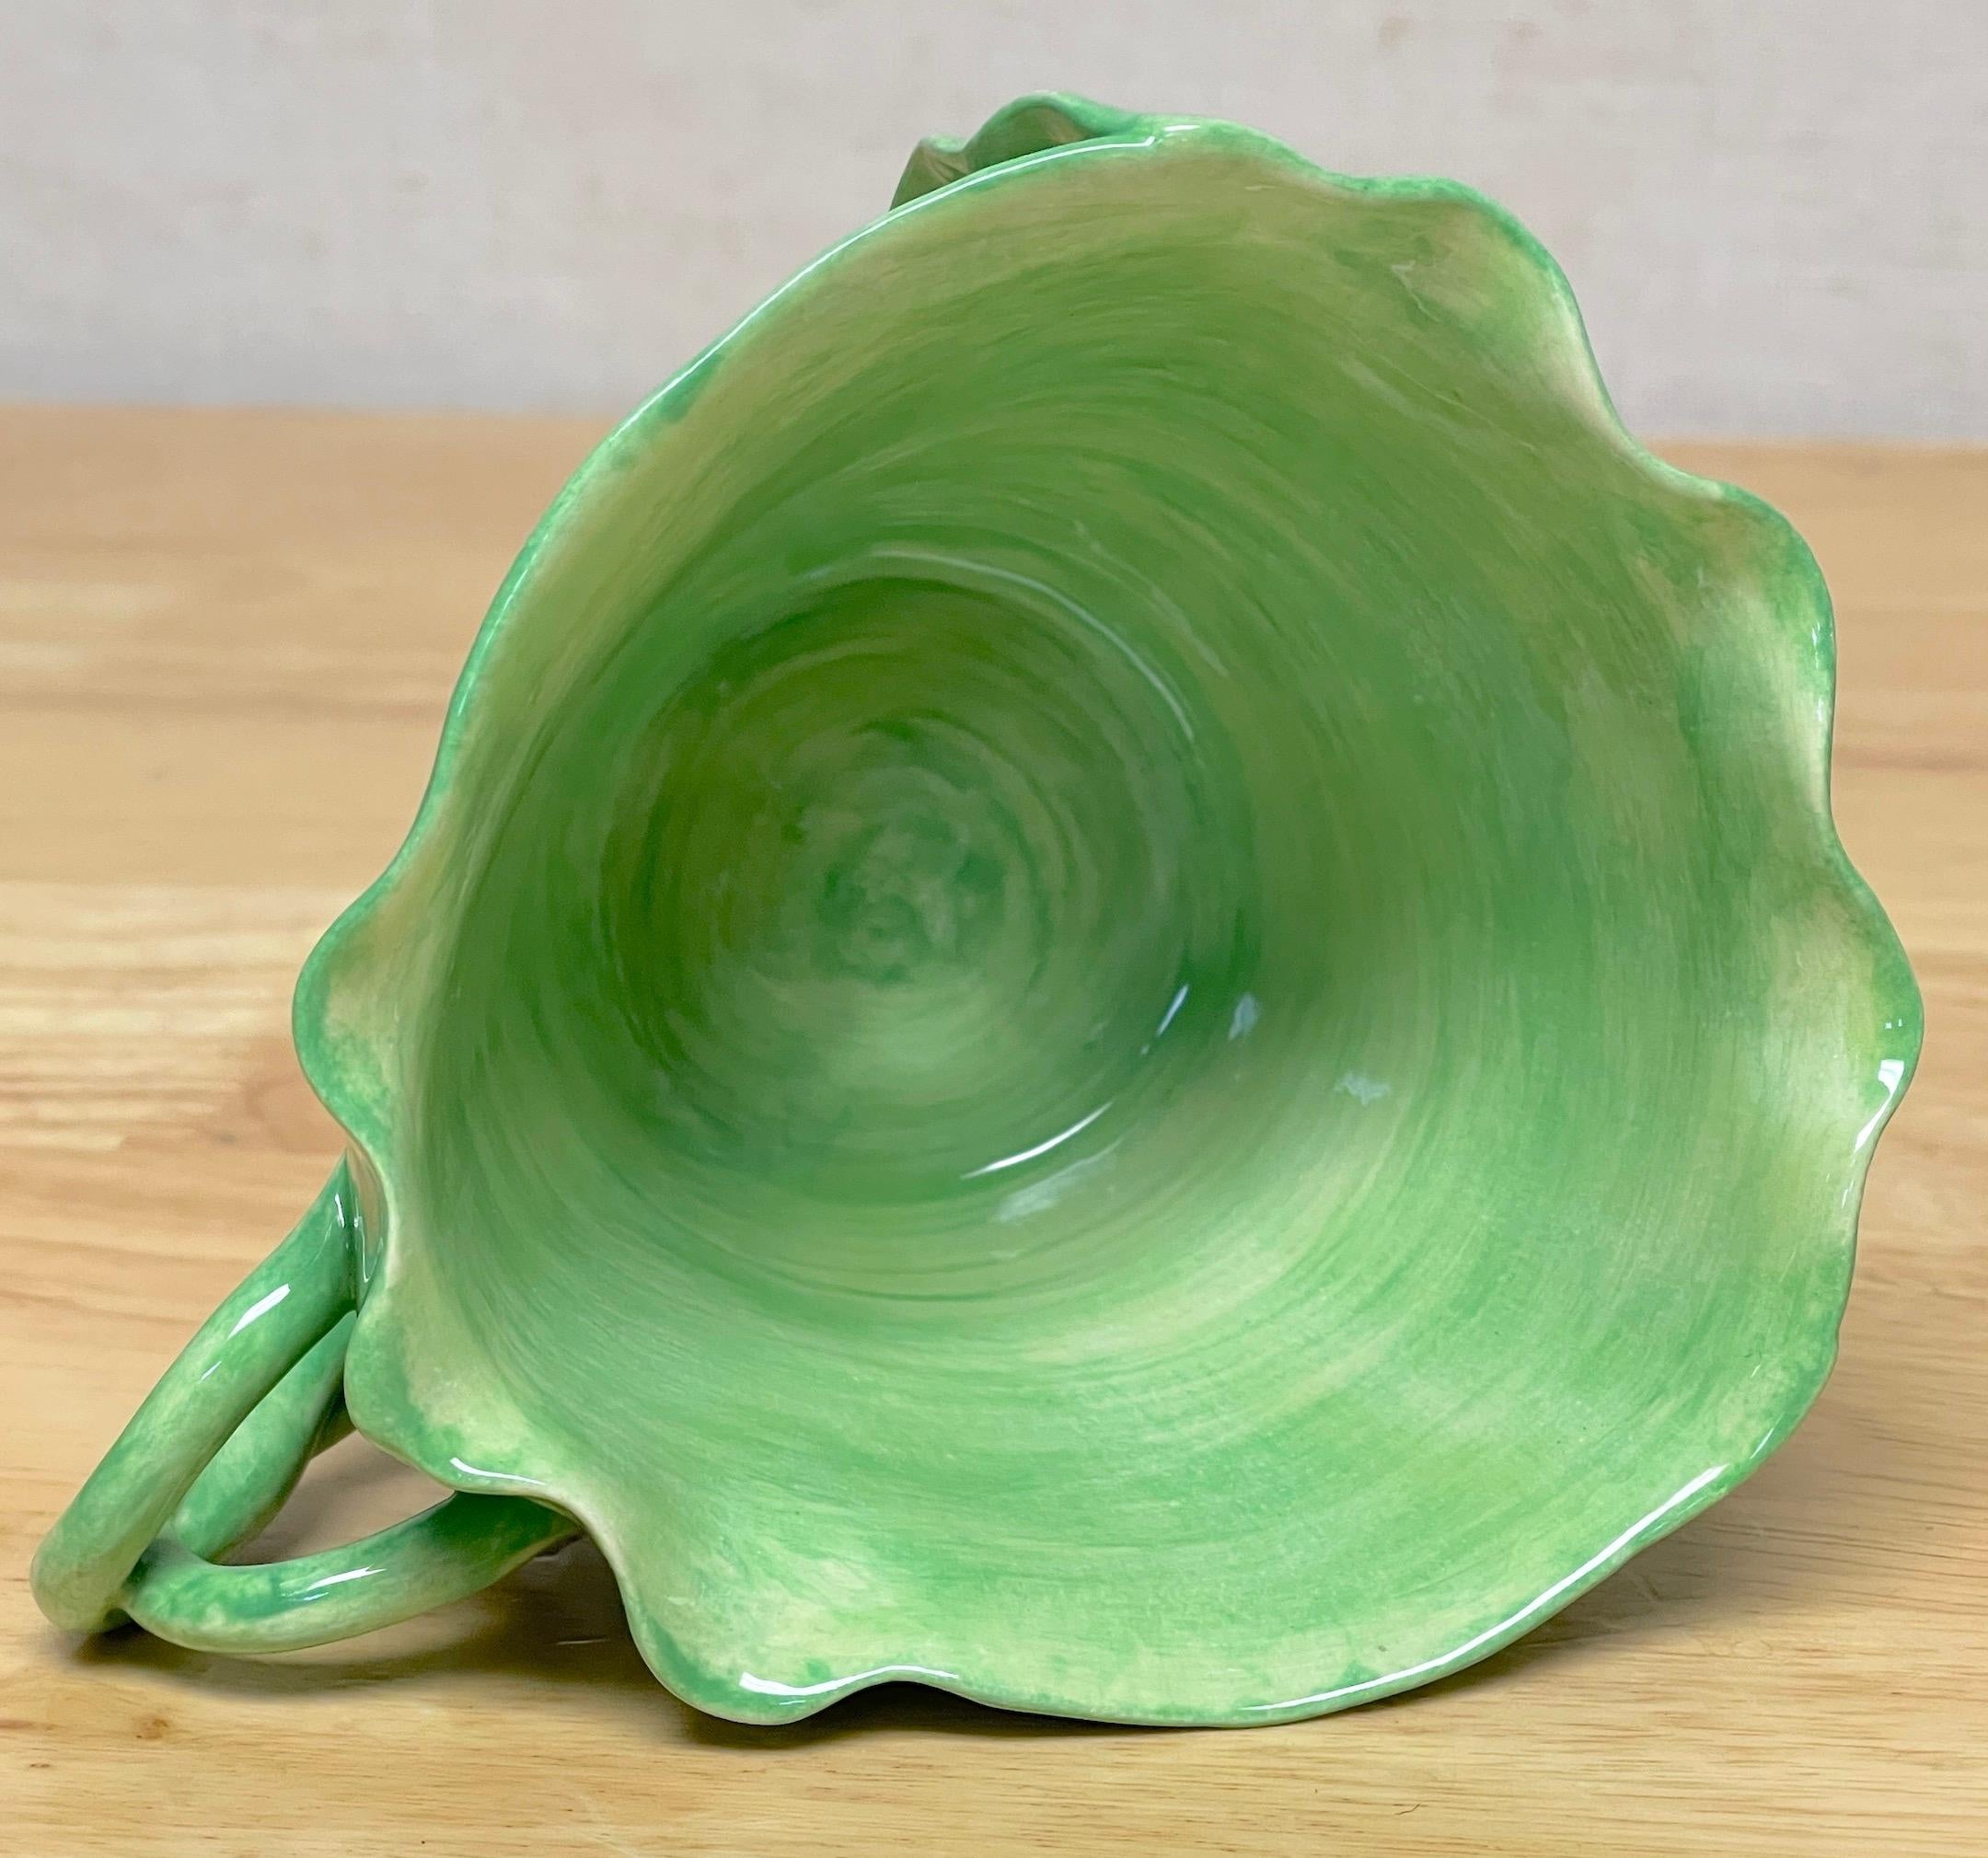 Dodie Thayer 'Jumbo' Lettuce Leaf Cup & Saucer, 5 Available, Sold Individually 7